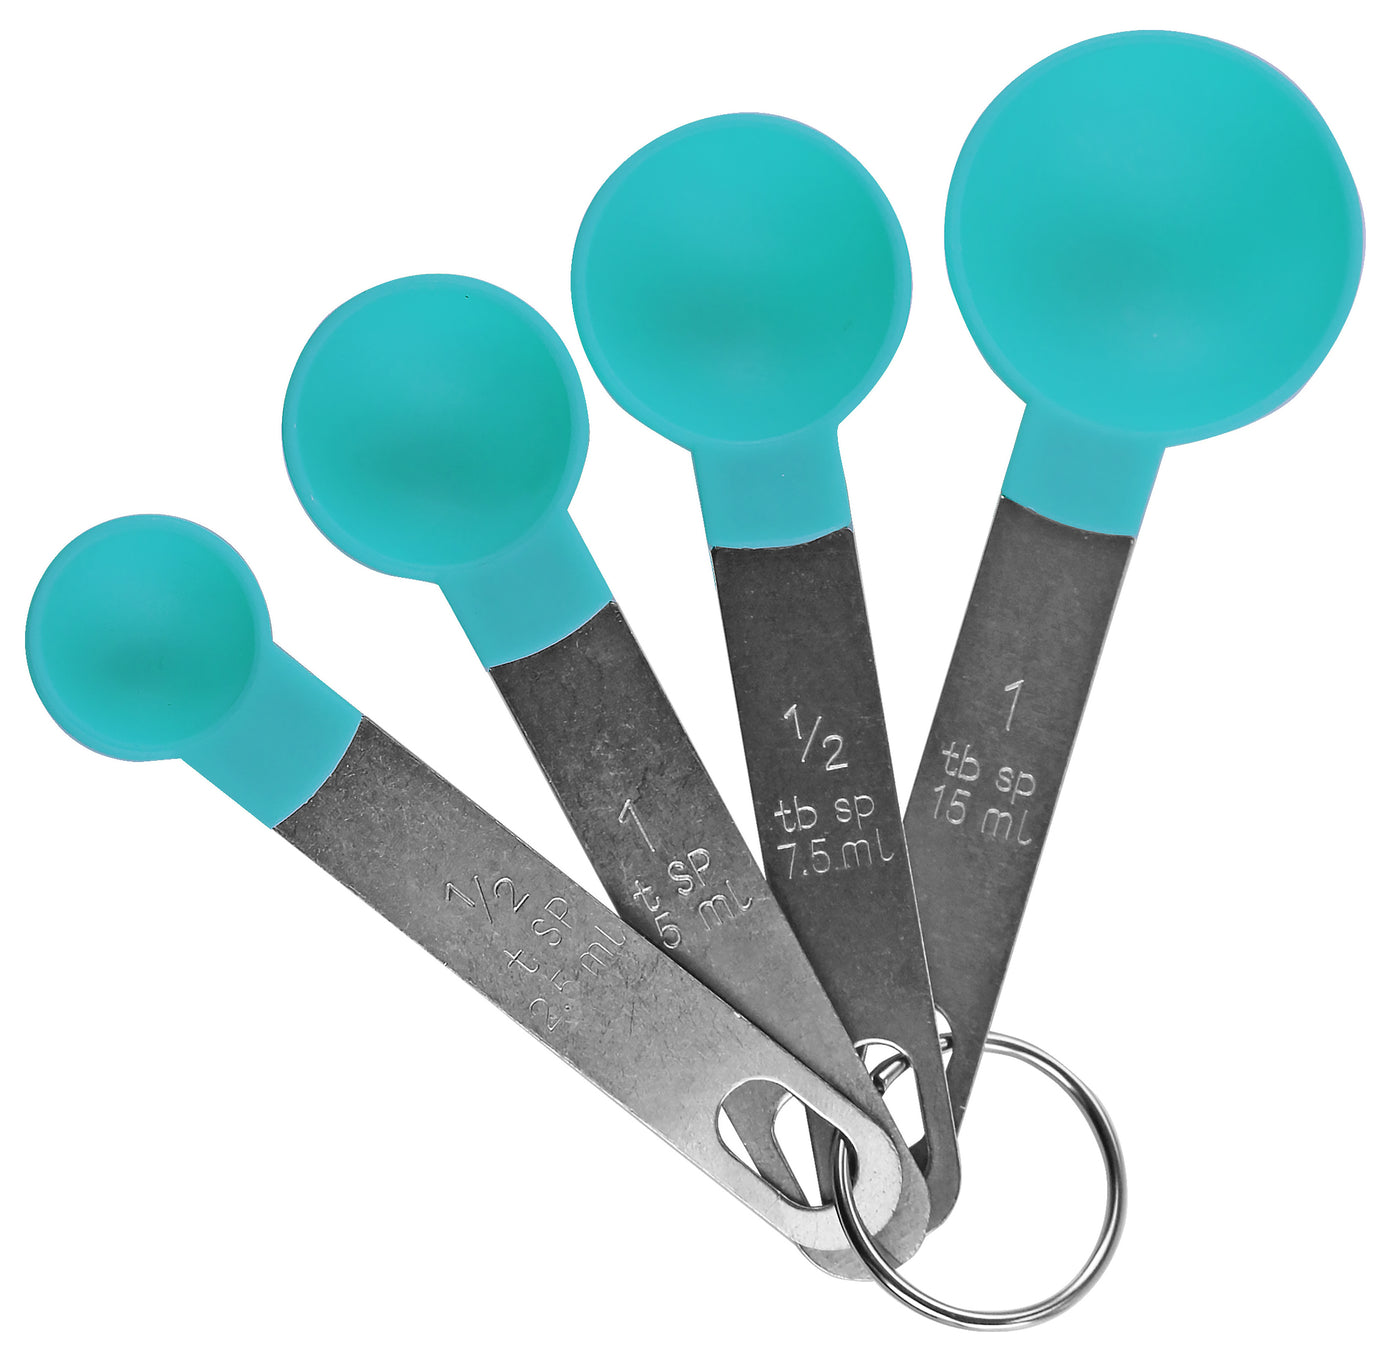 Measuring Spoon, Stainless Steel Measuring Spoons, Set Of 8 Blue Plastic  Measuring Cups And Spoons, Kitchen Utensils For Liquids And Solids